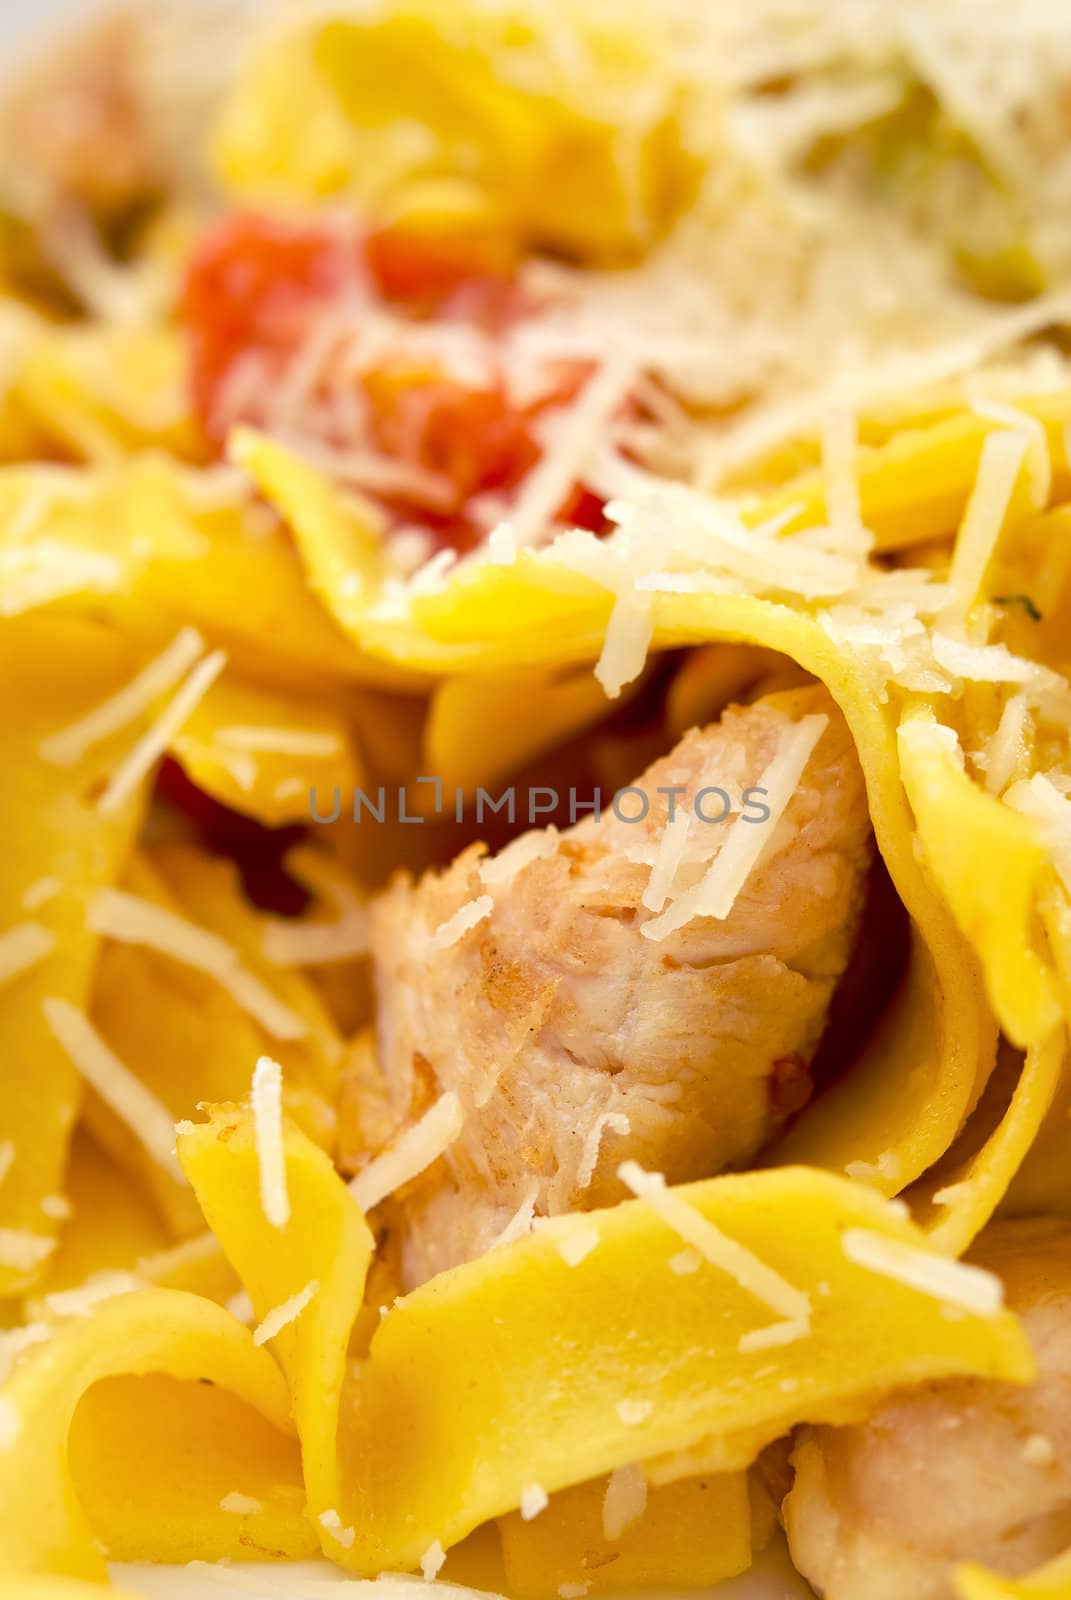 Spaghetti pasta with cheese, chicken and tomato by kirs-ua